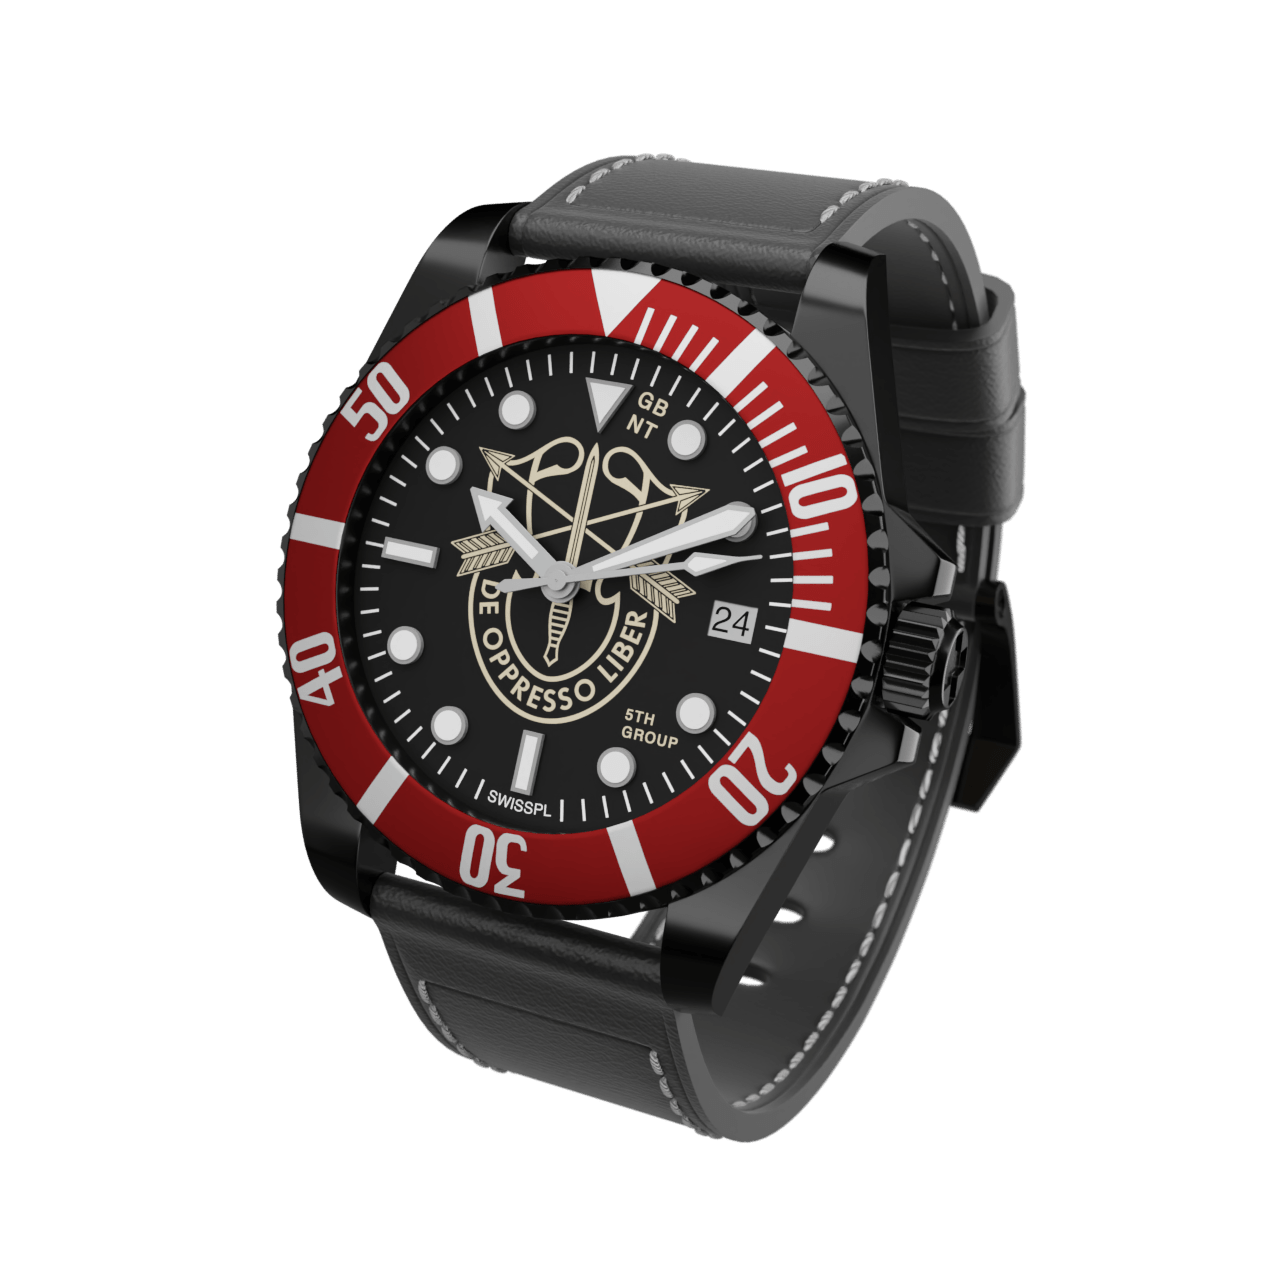 Special Forces 5th Group / Classic 42mm